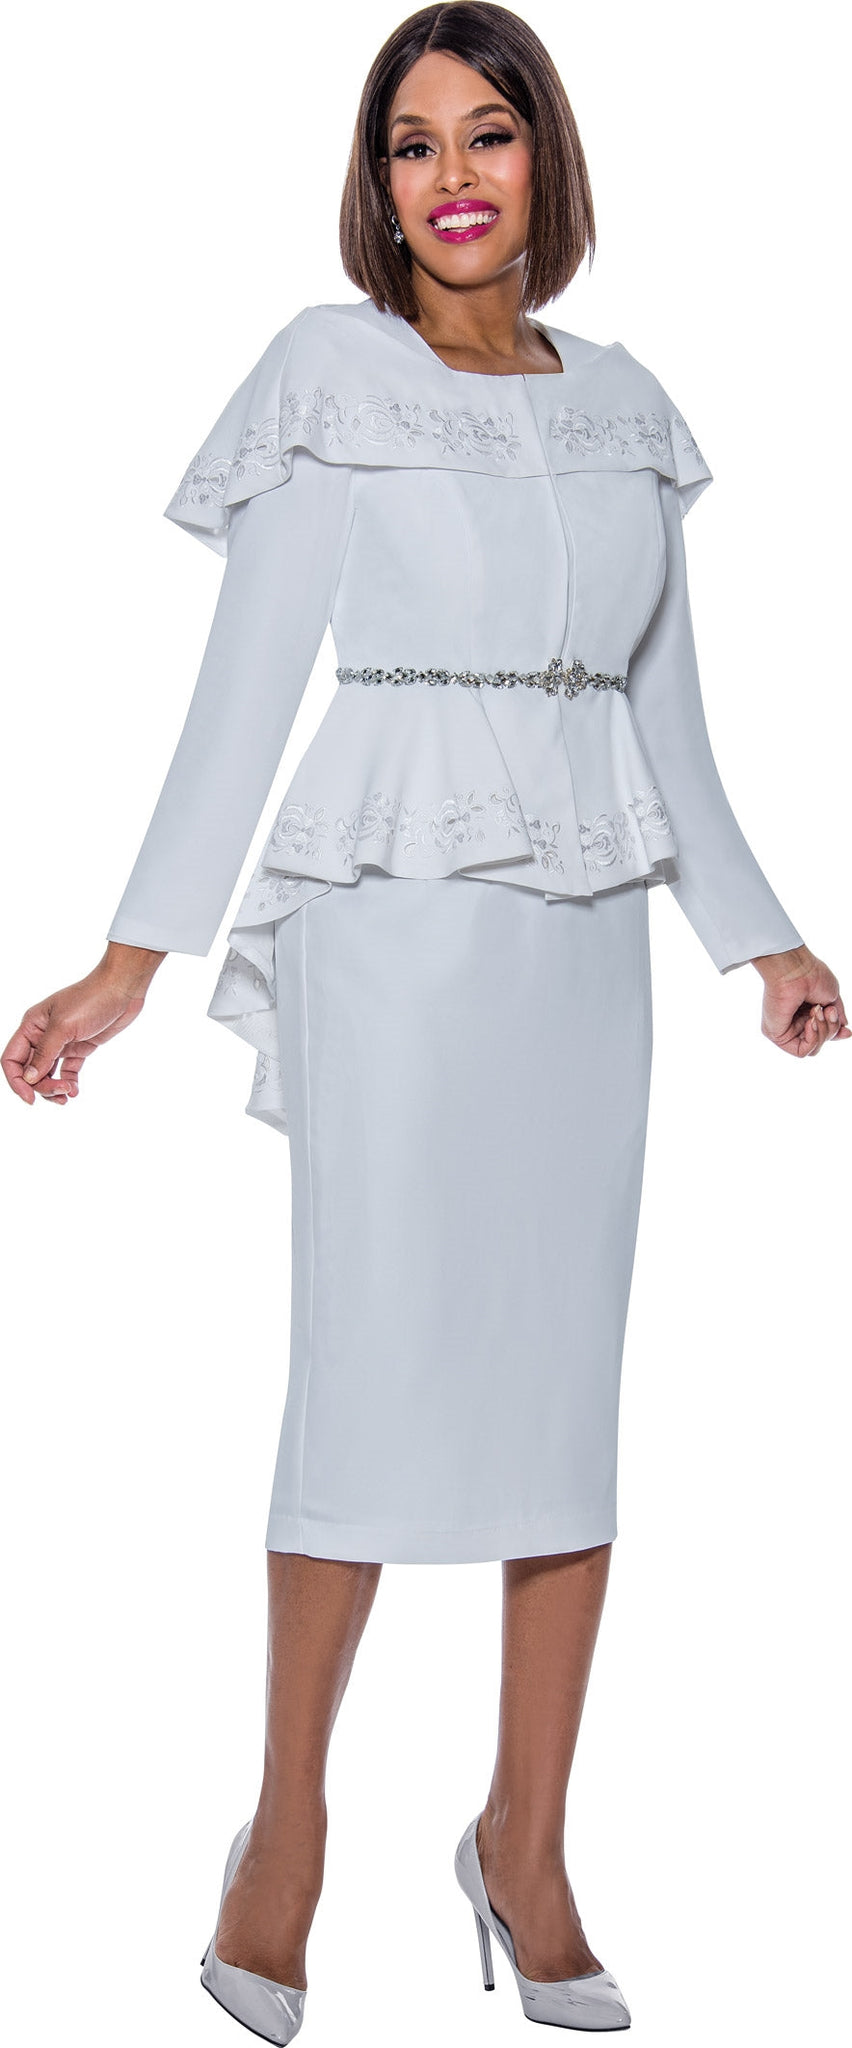 Divine Queen Skirt Suit 2162C-White - Church Suits For Less